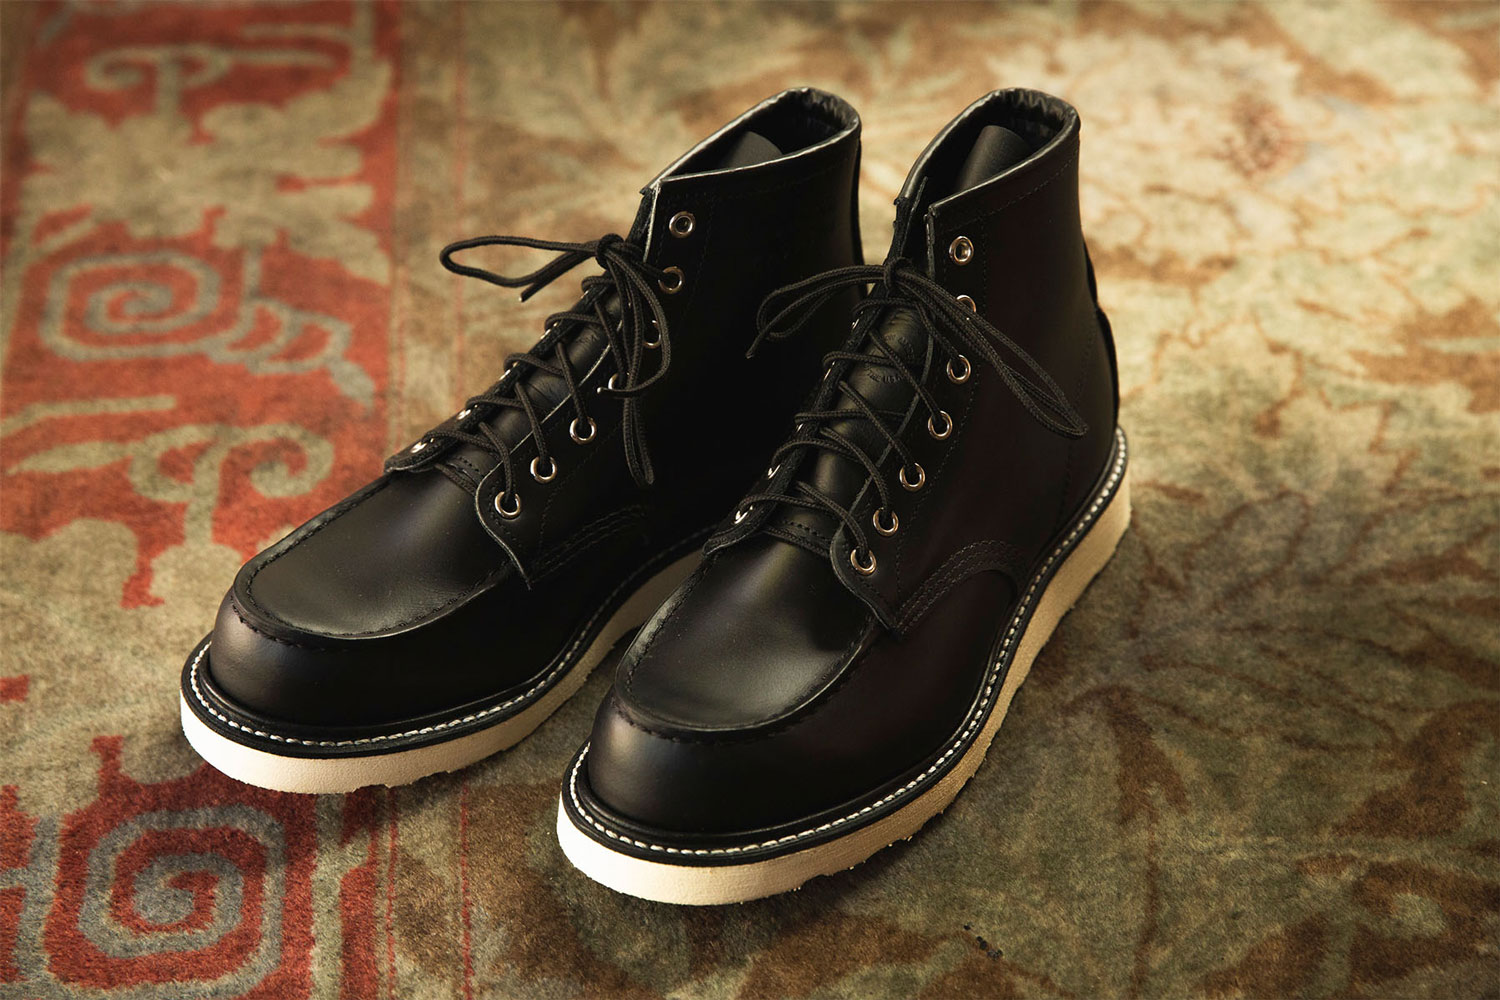 Coming Soon: fragment design x Red Wing Footwear | HBX - Globally